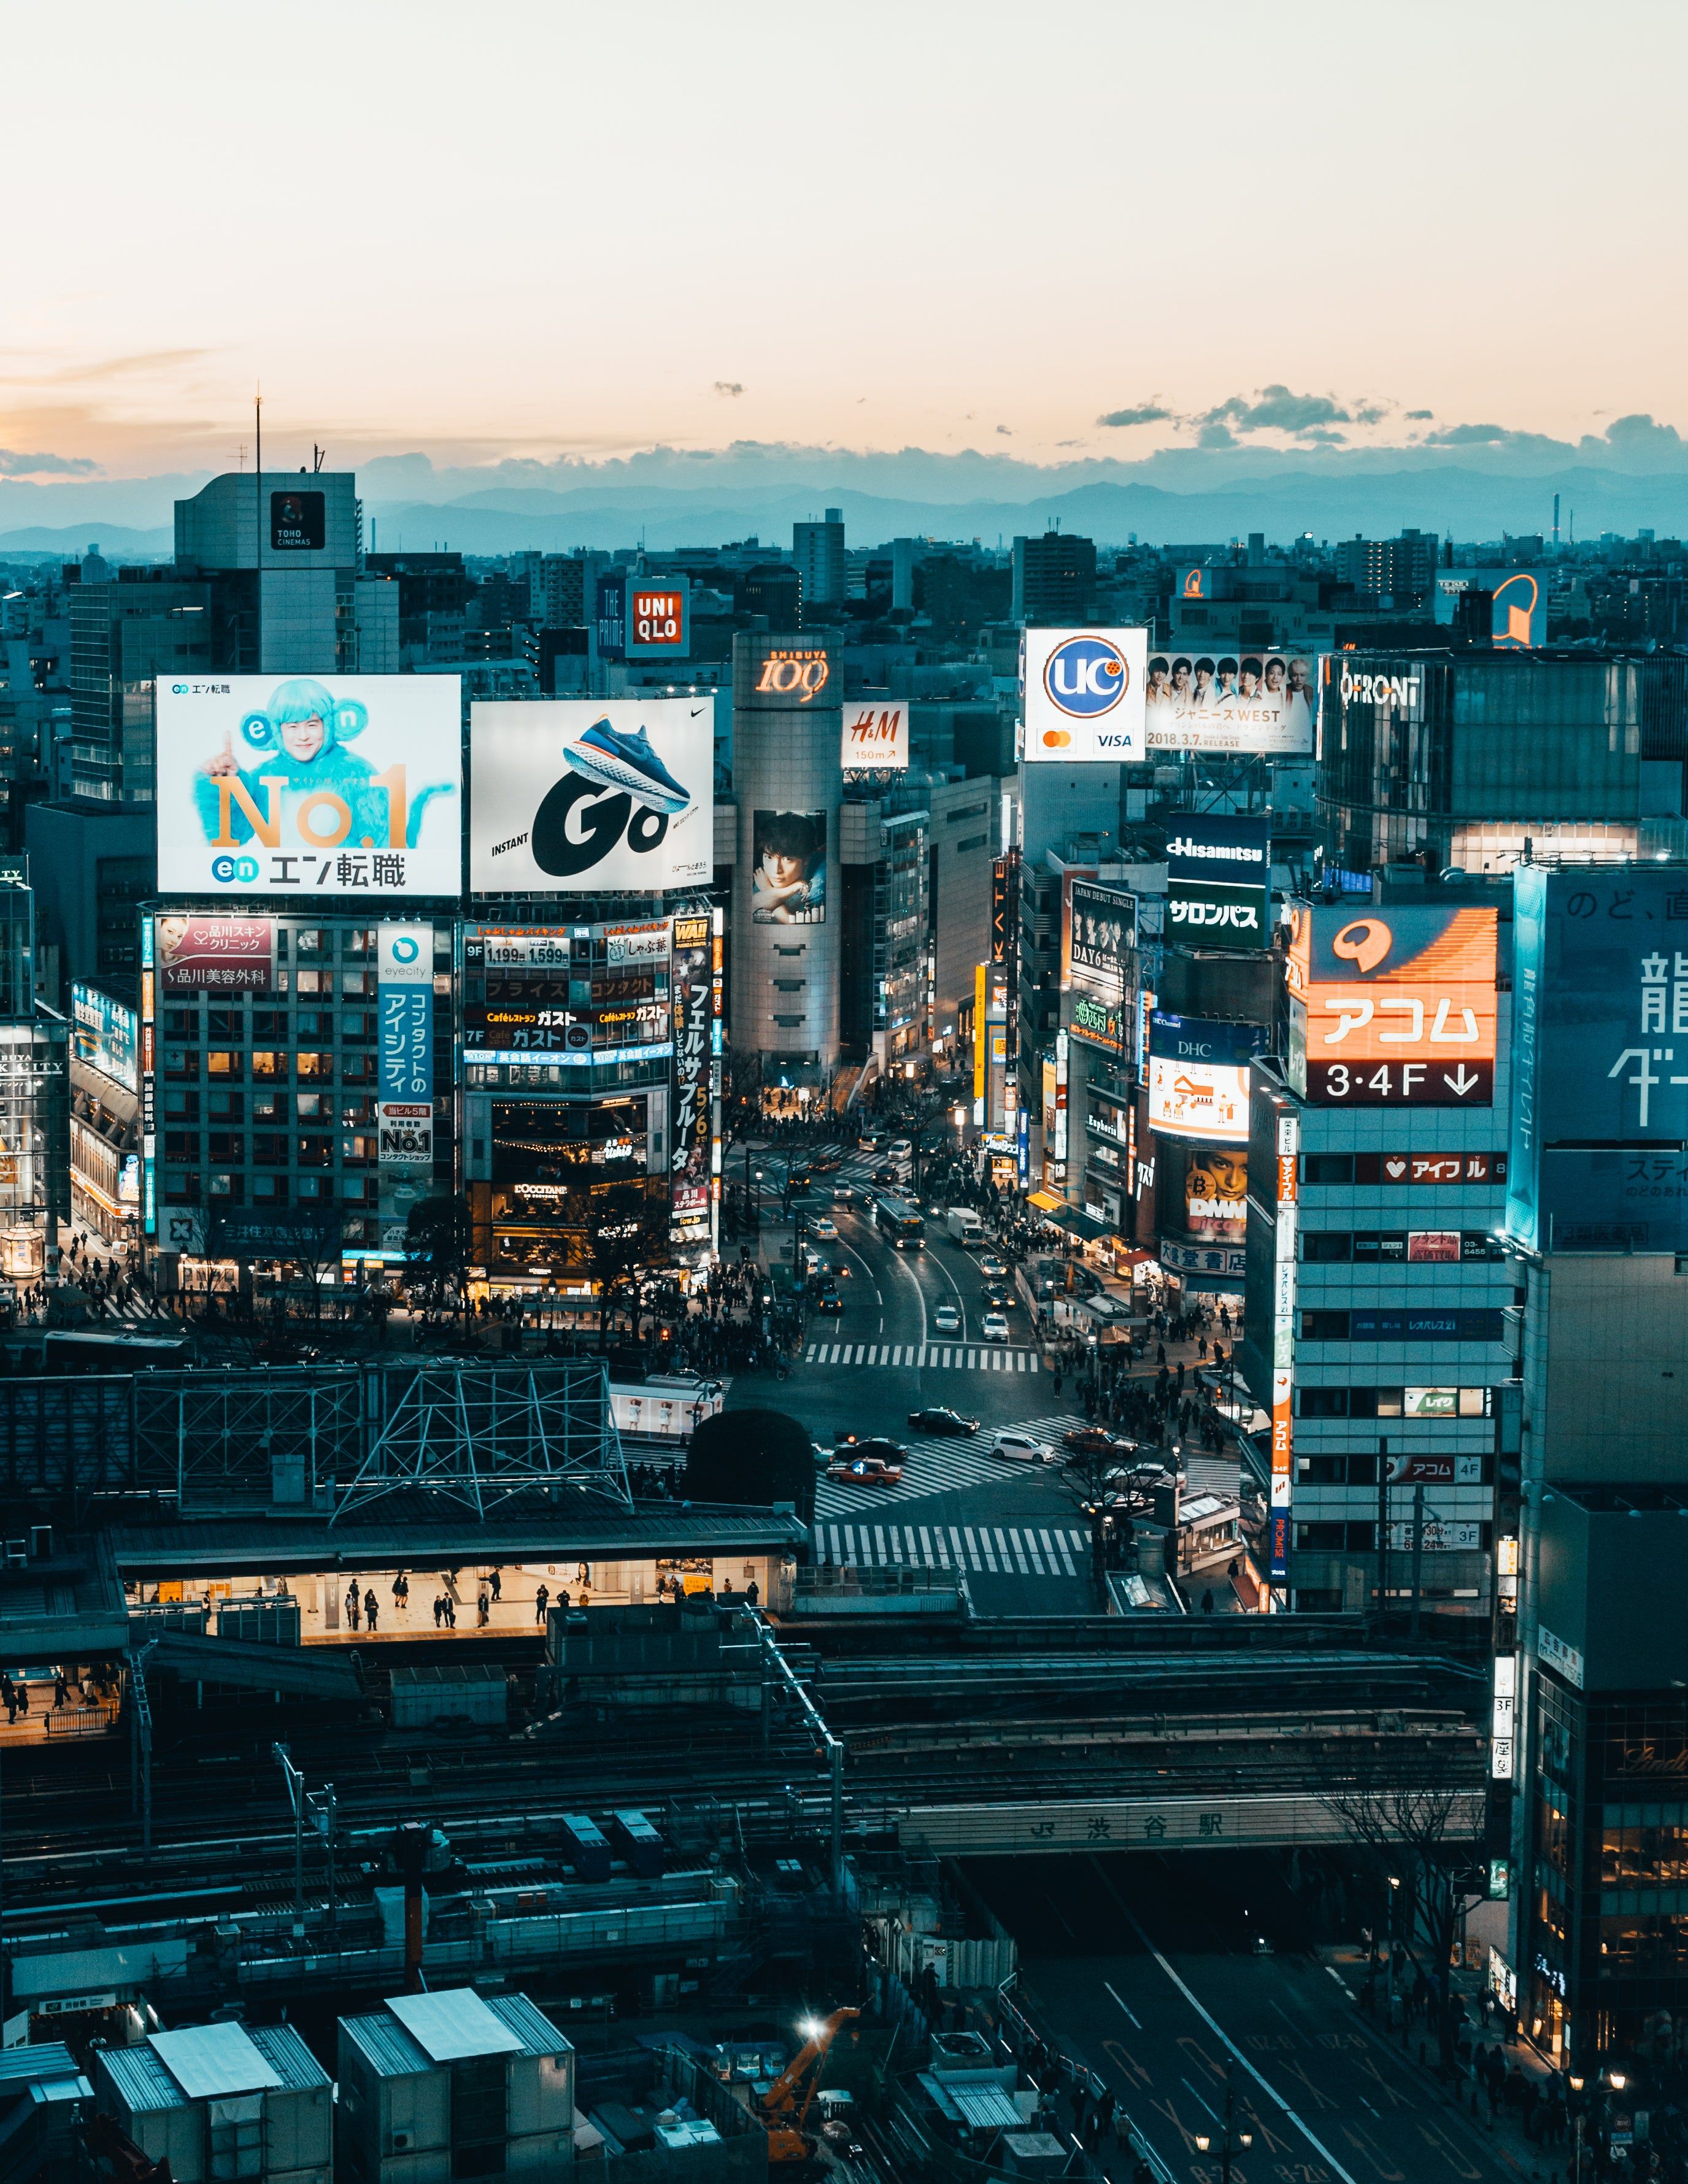 Browse Free HD Image of The Urban Landscape Of Tokyo In The Evening Light